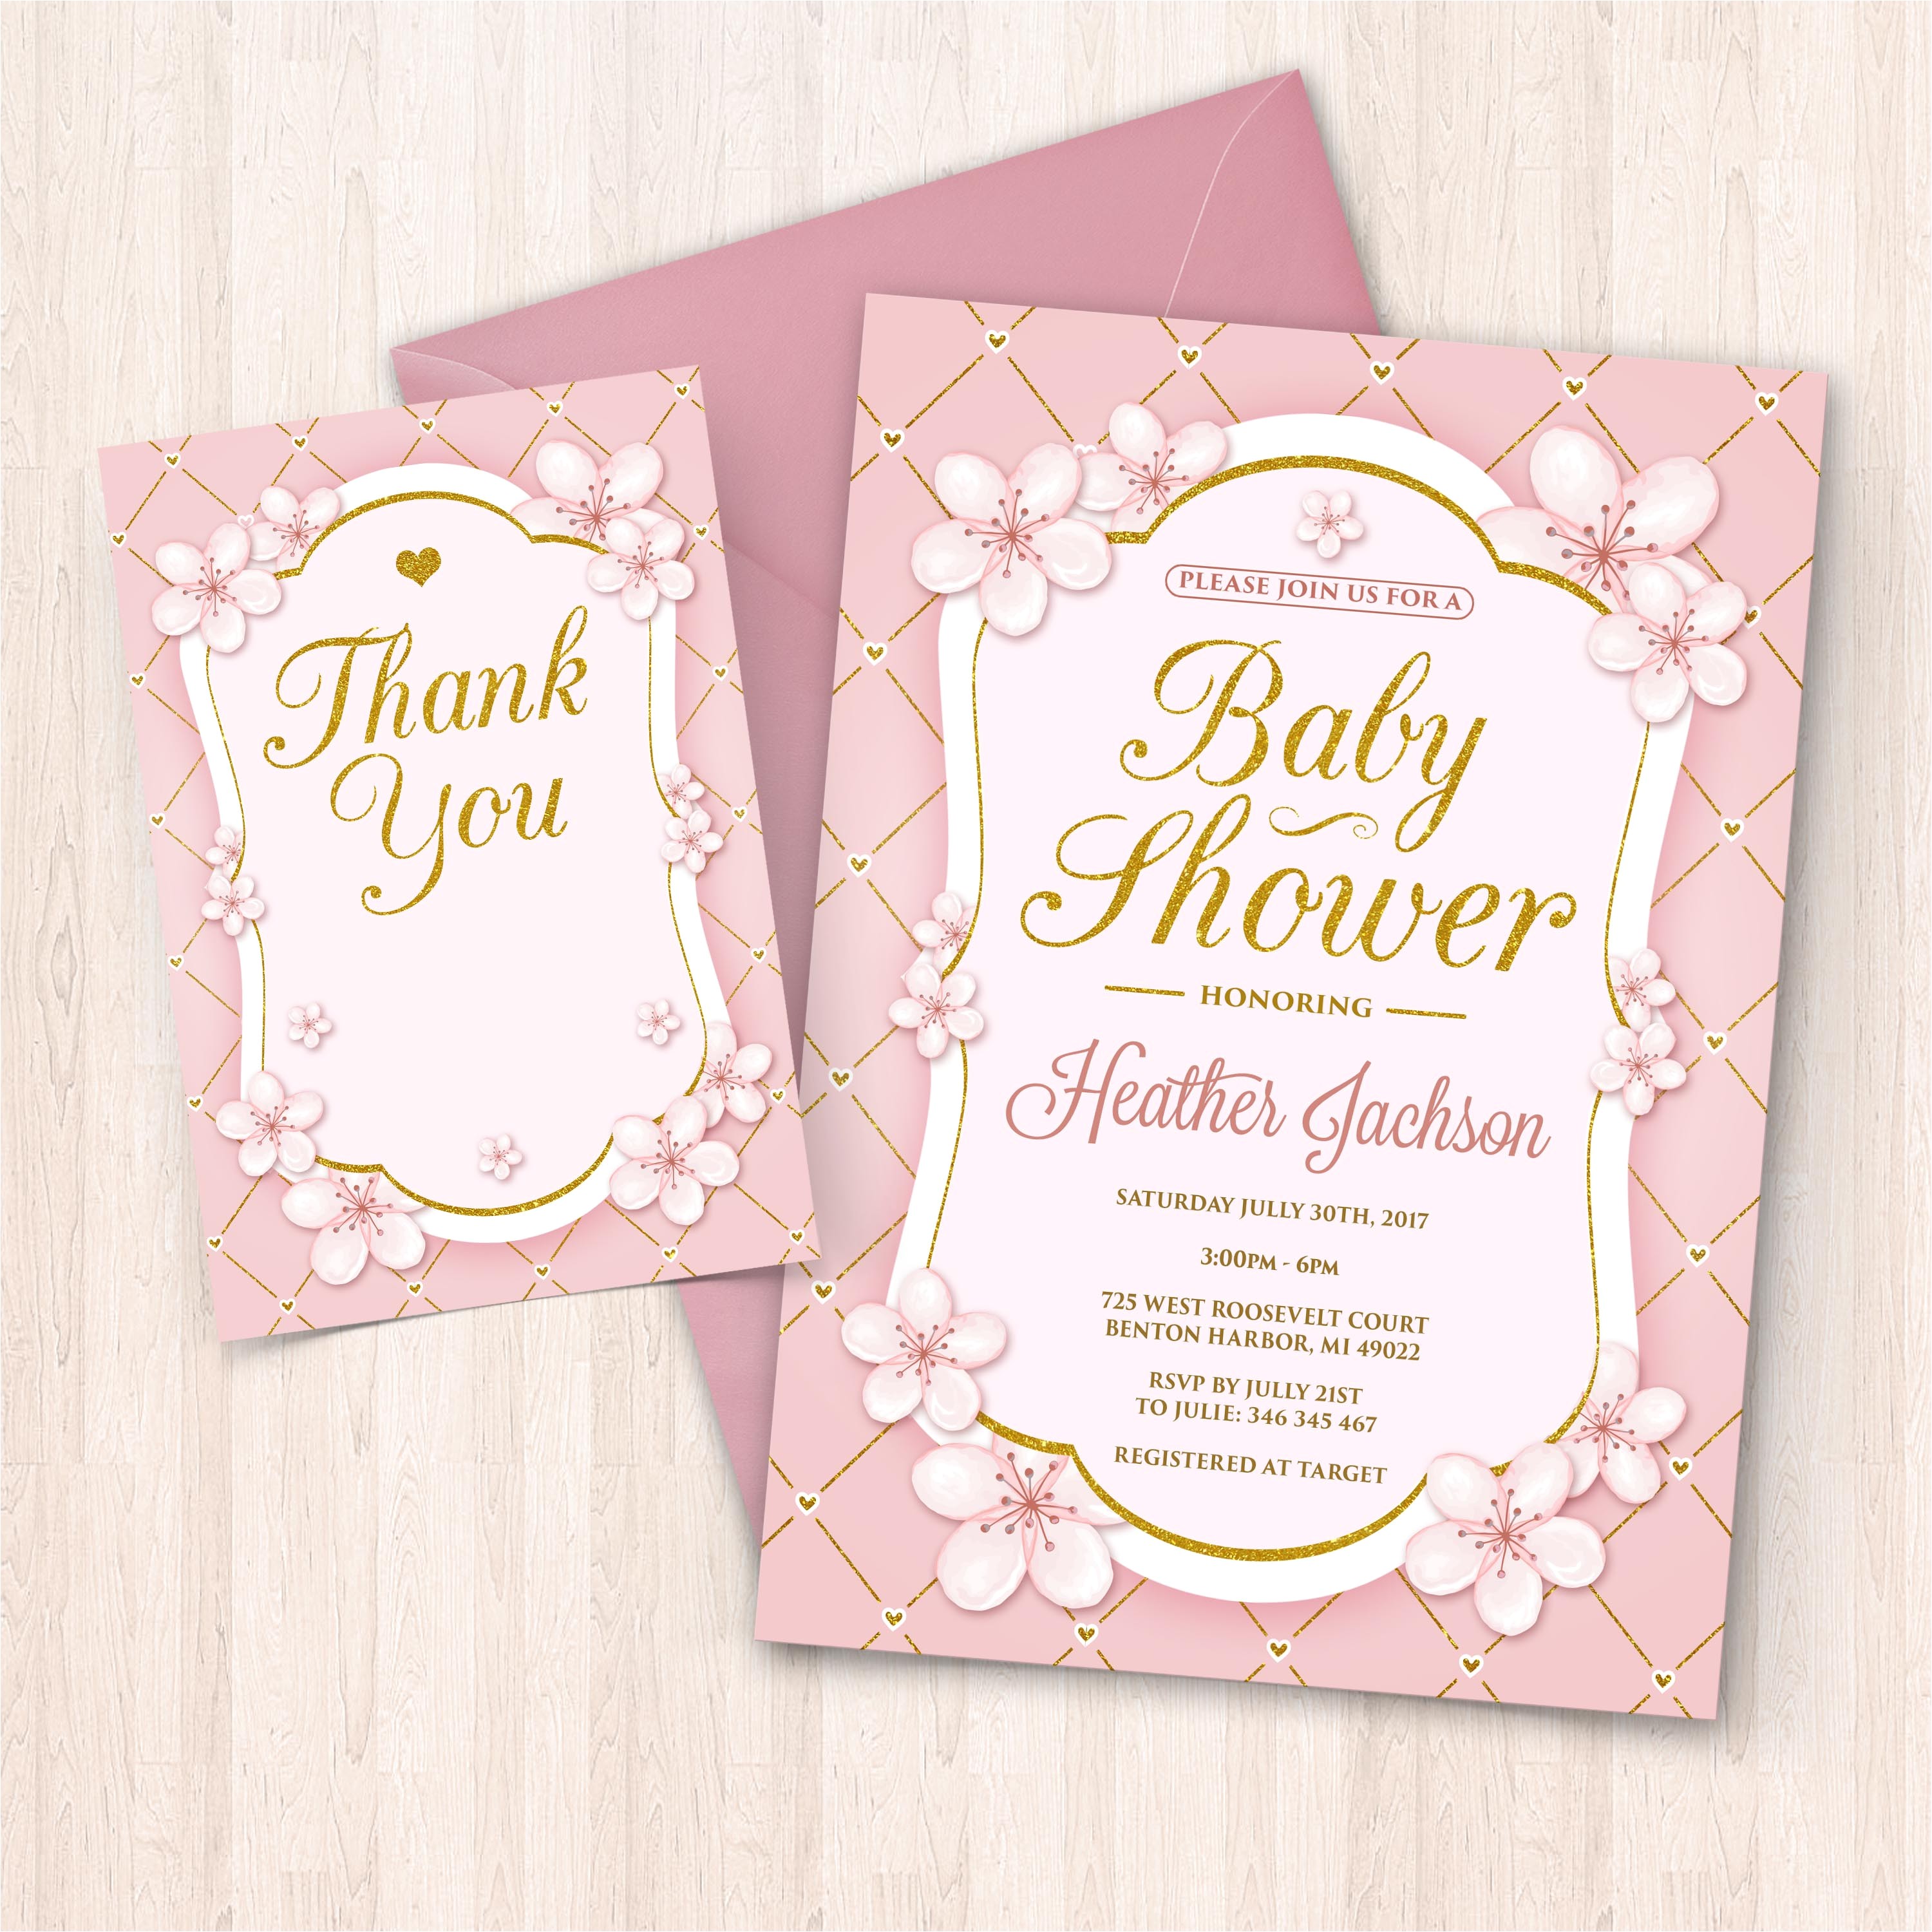 printable pink white gold baby shower invitations free thank you cards to print at home